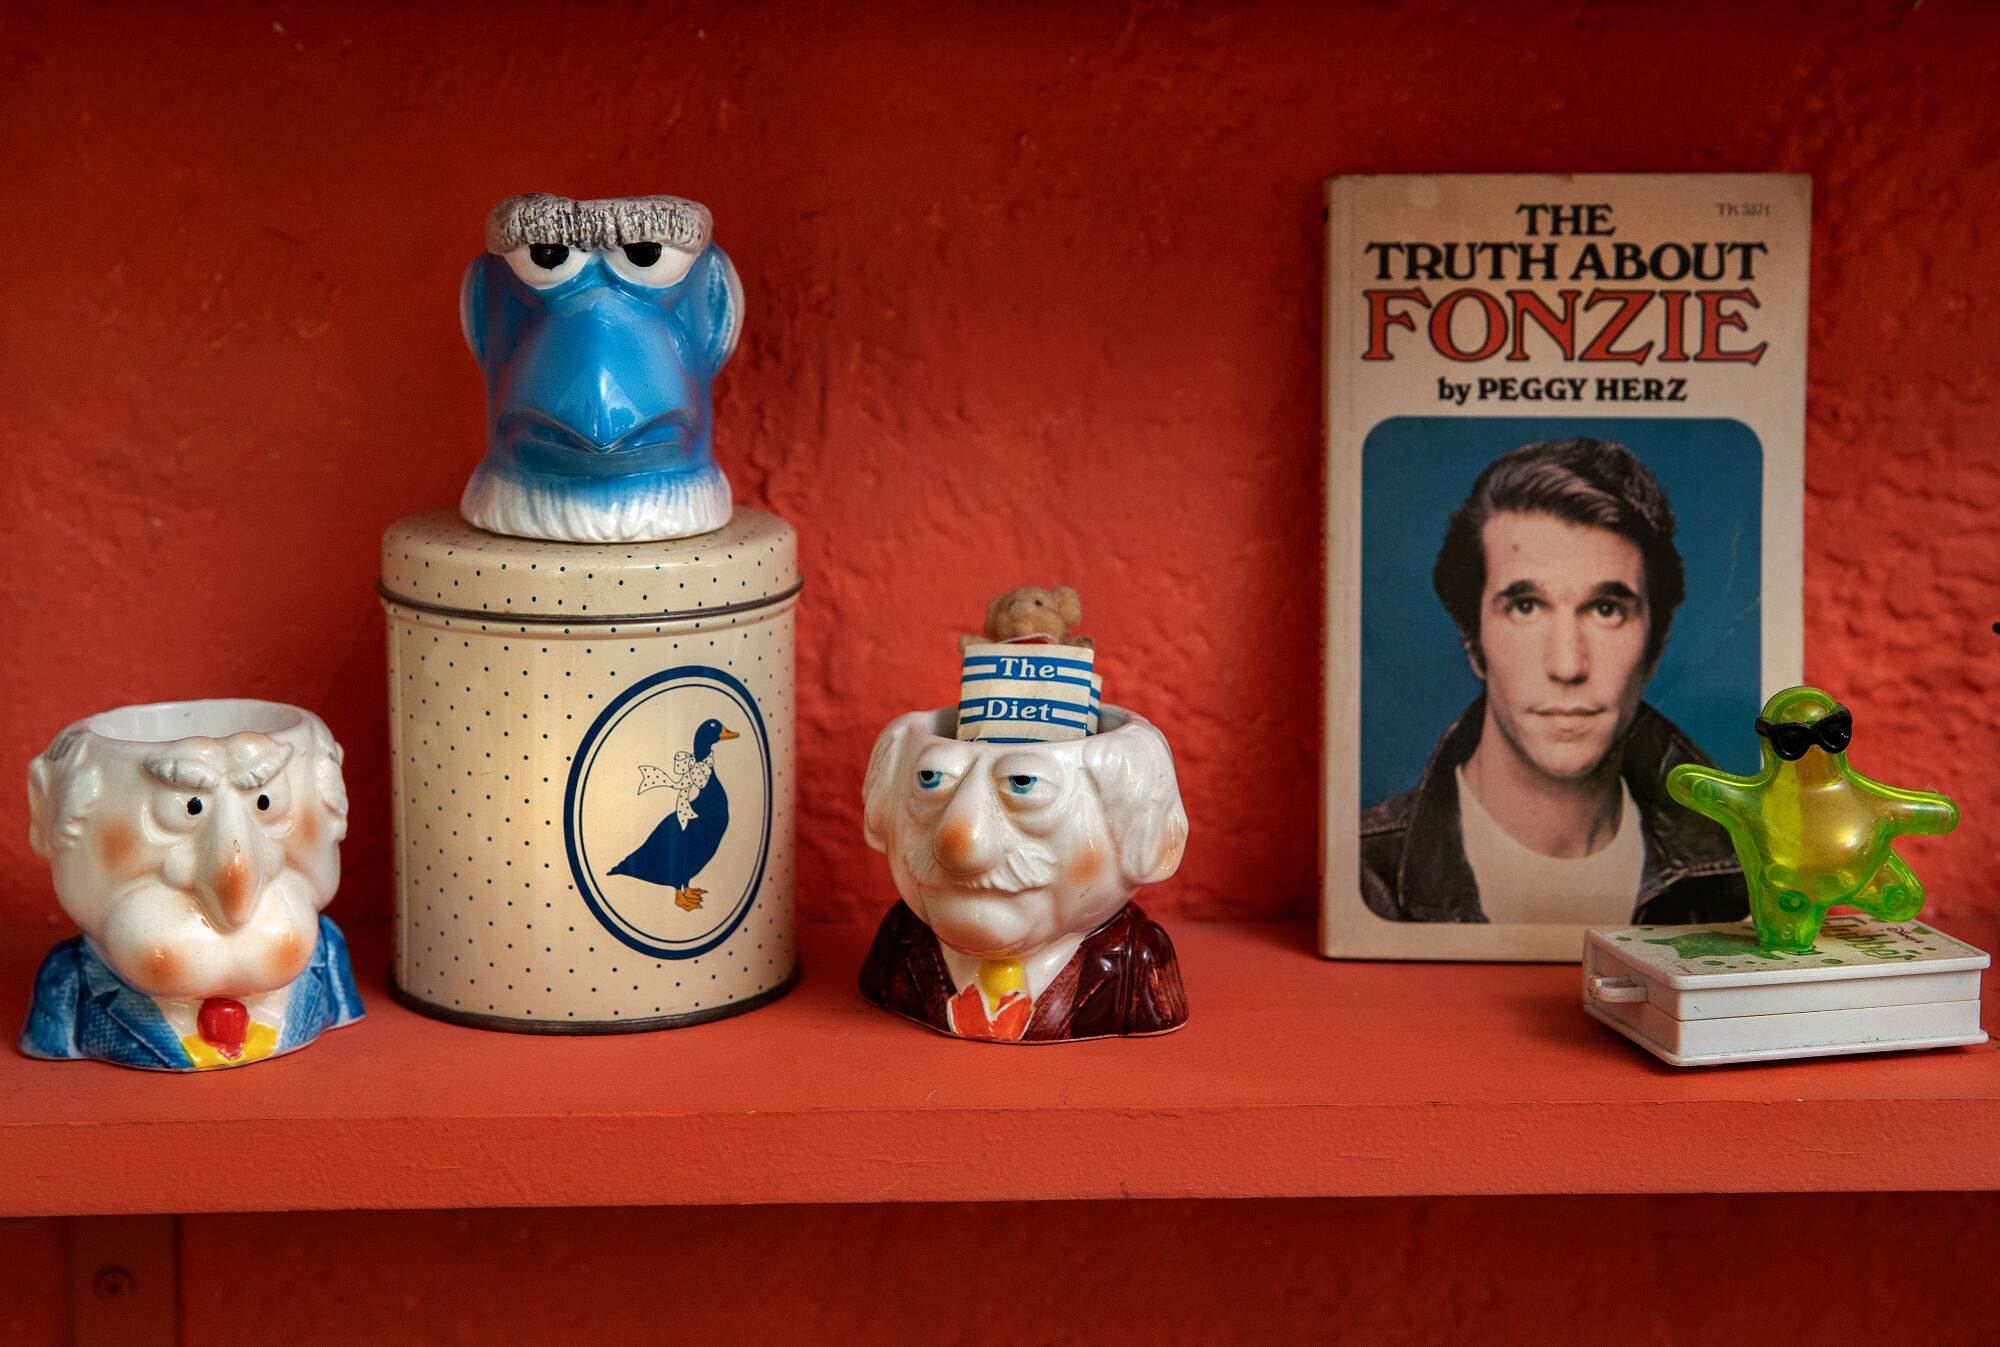 Items on an orange shelf, including a book on Fonzie, a plastic flubber toy and muppet-themed mini vases.